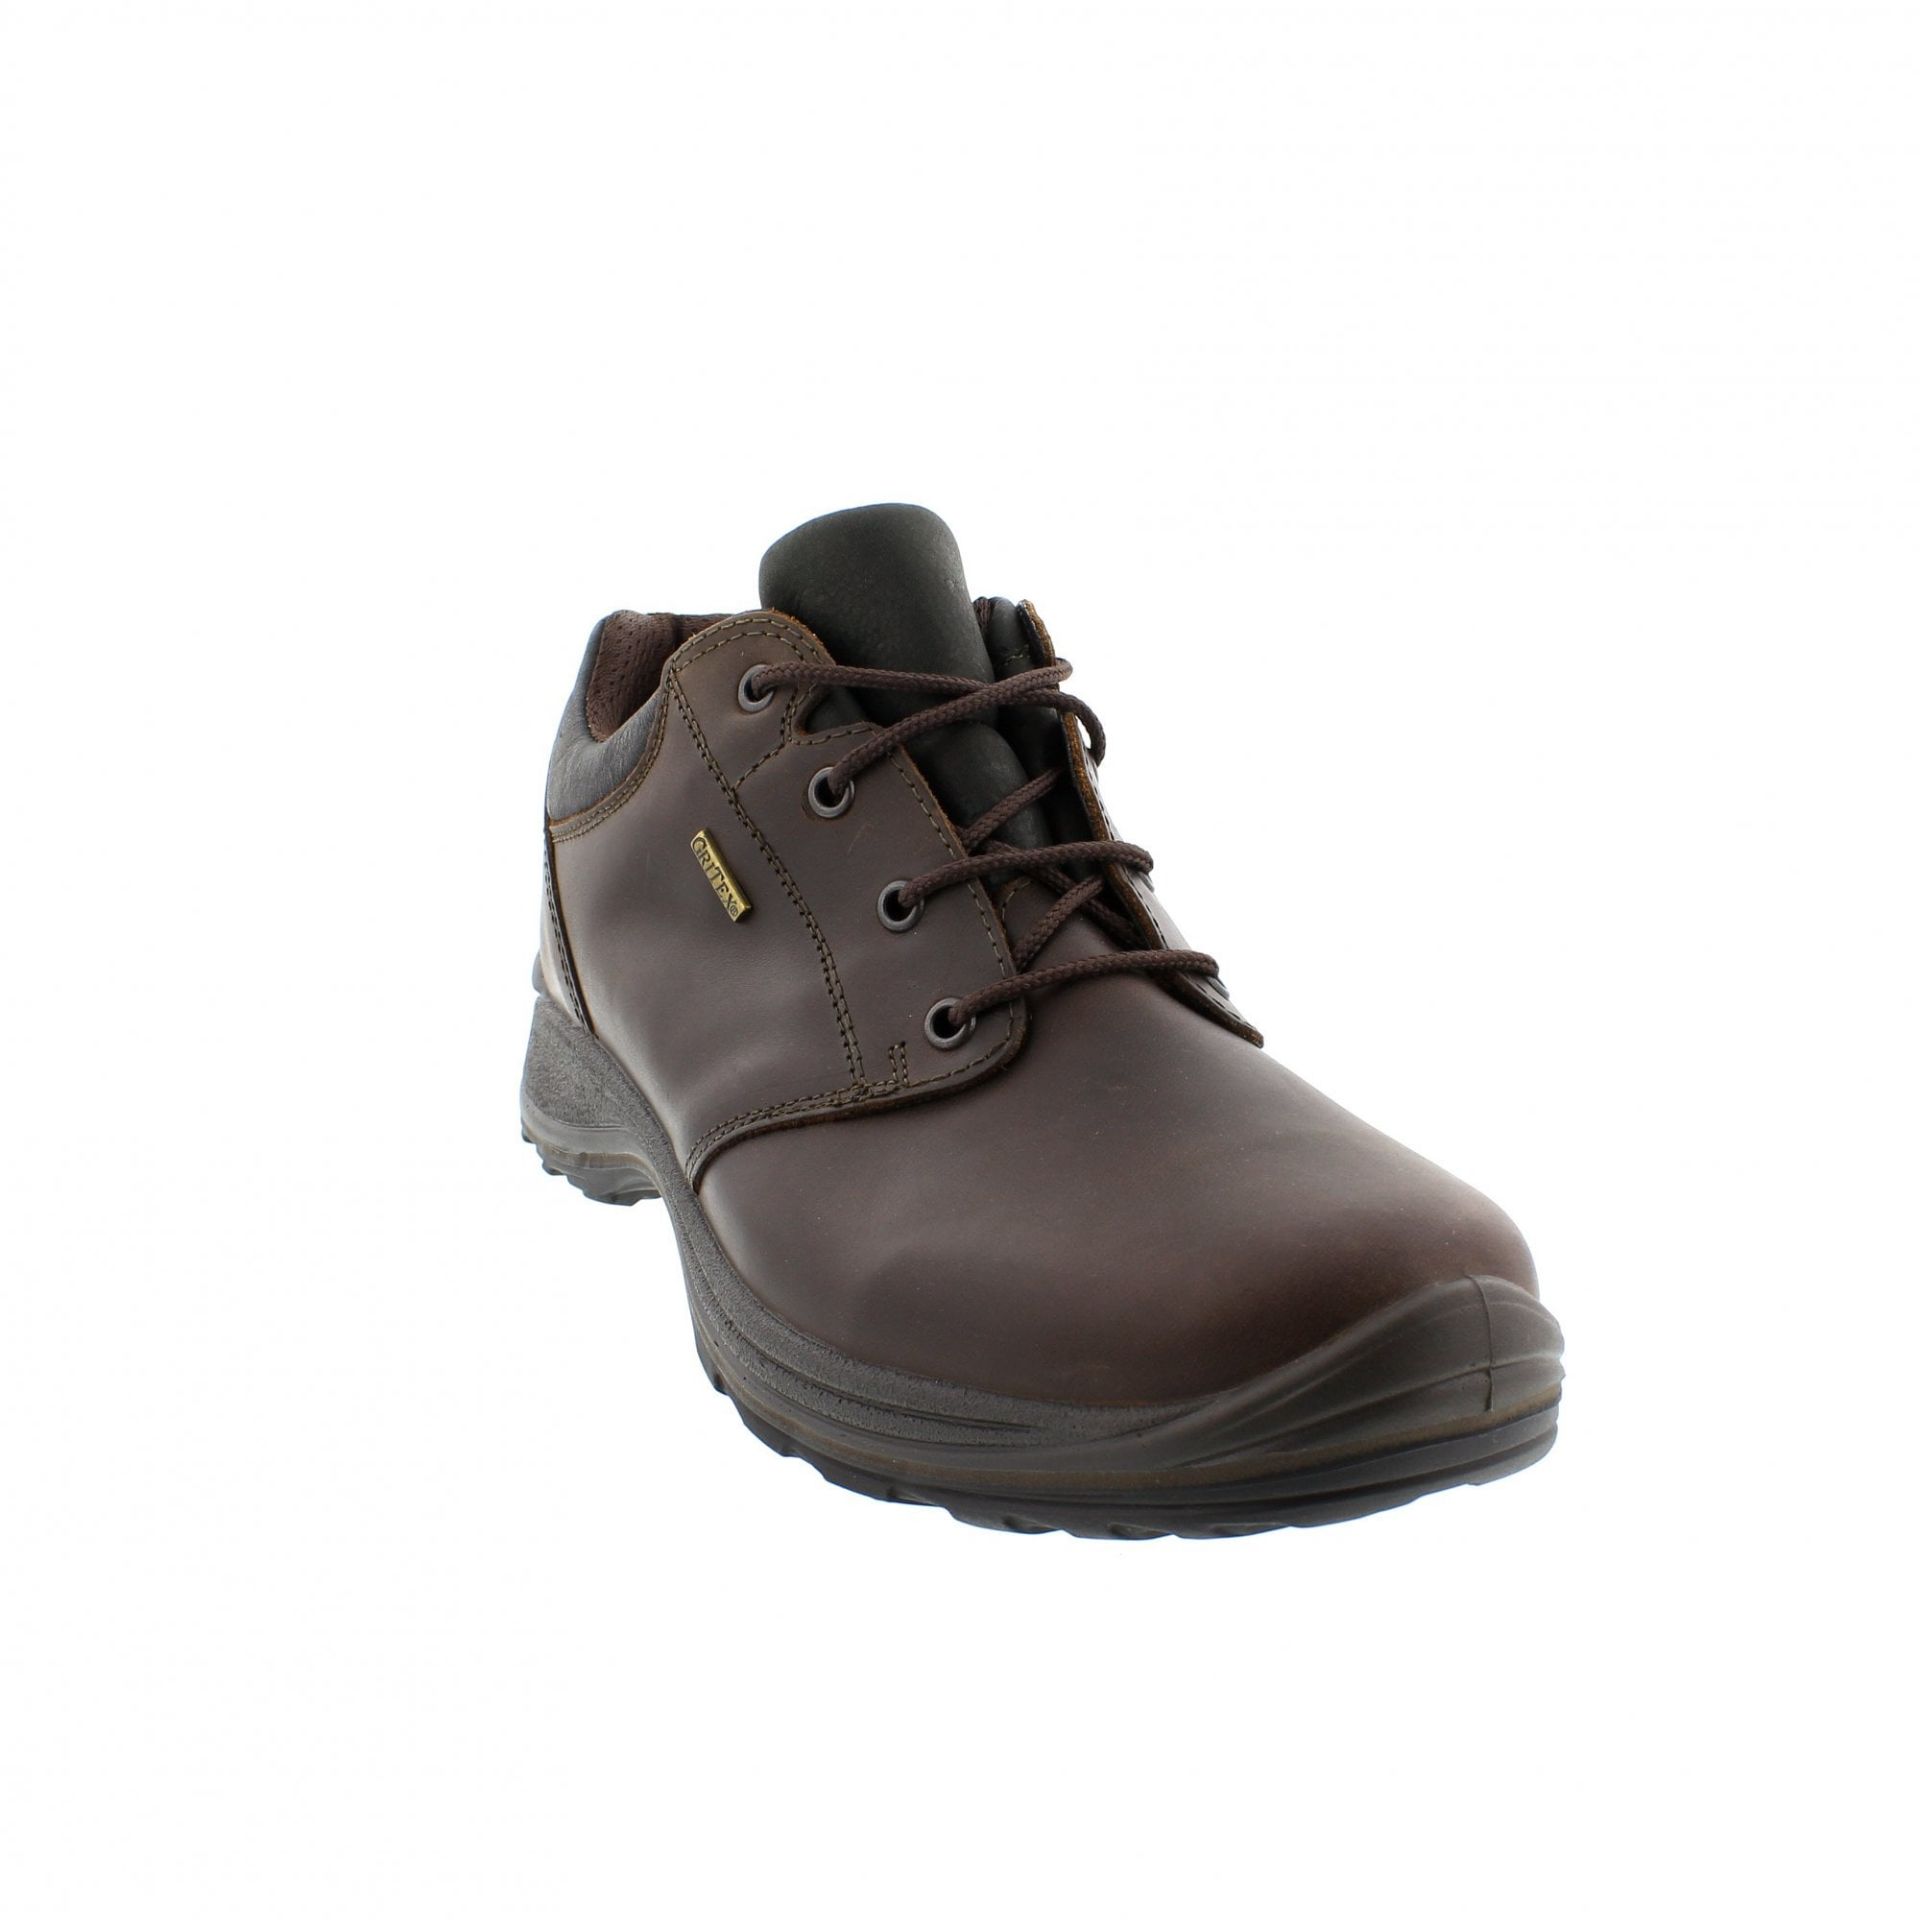 1 x Pair of Men's Grisport Brown Leather GriTex Shoes - Rogerson Footwear - Brand New and Boxed - - Image 5 of 9